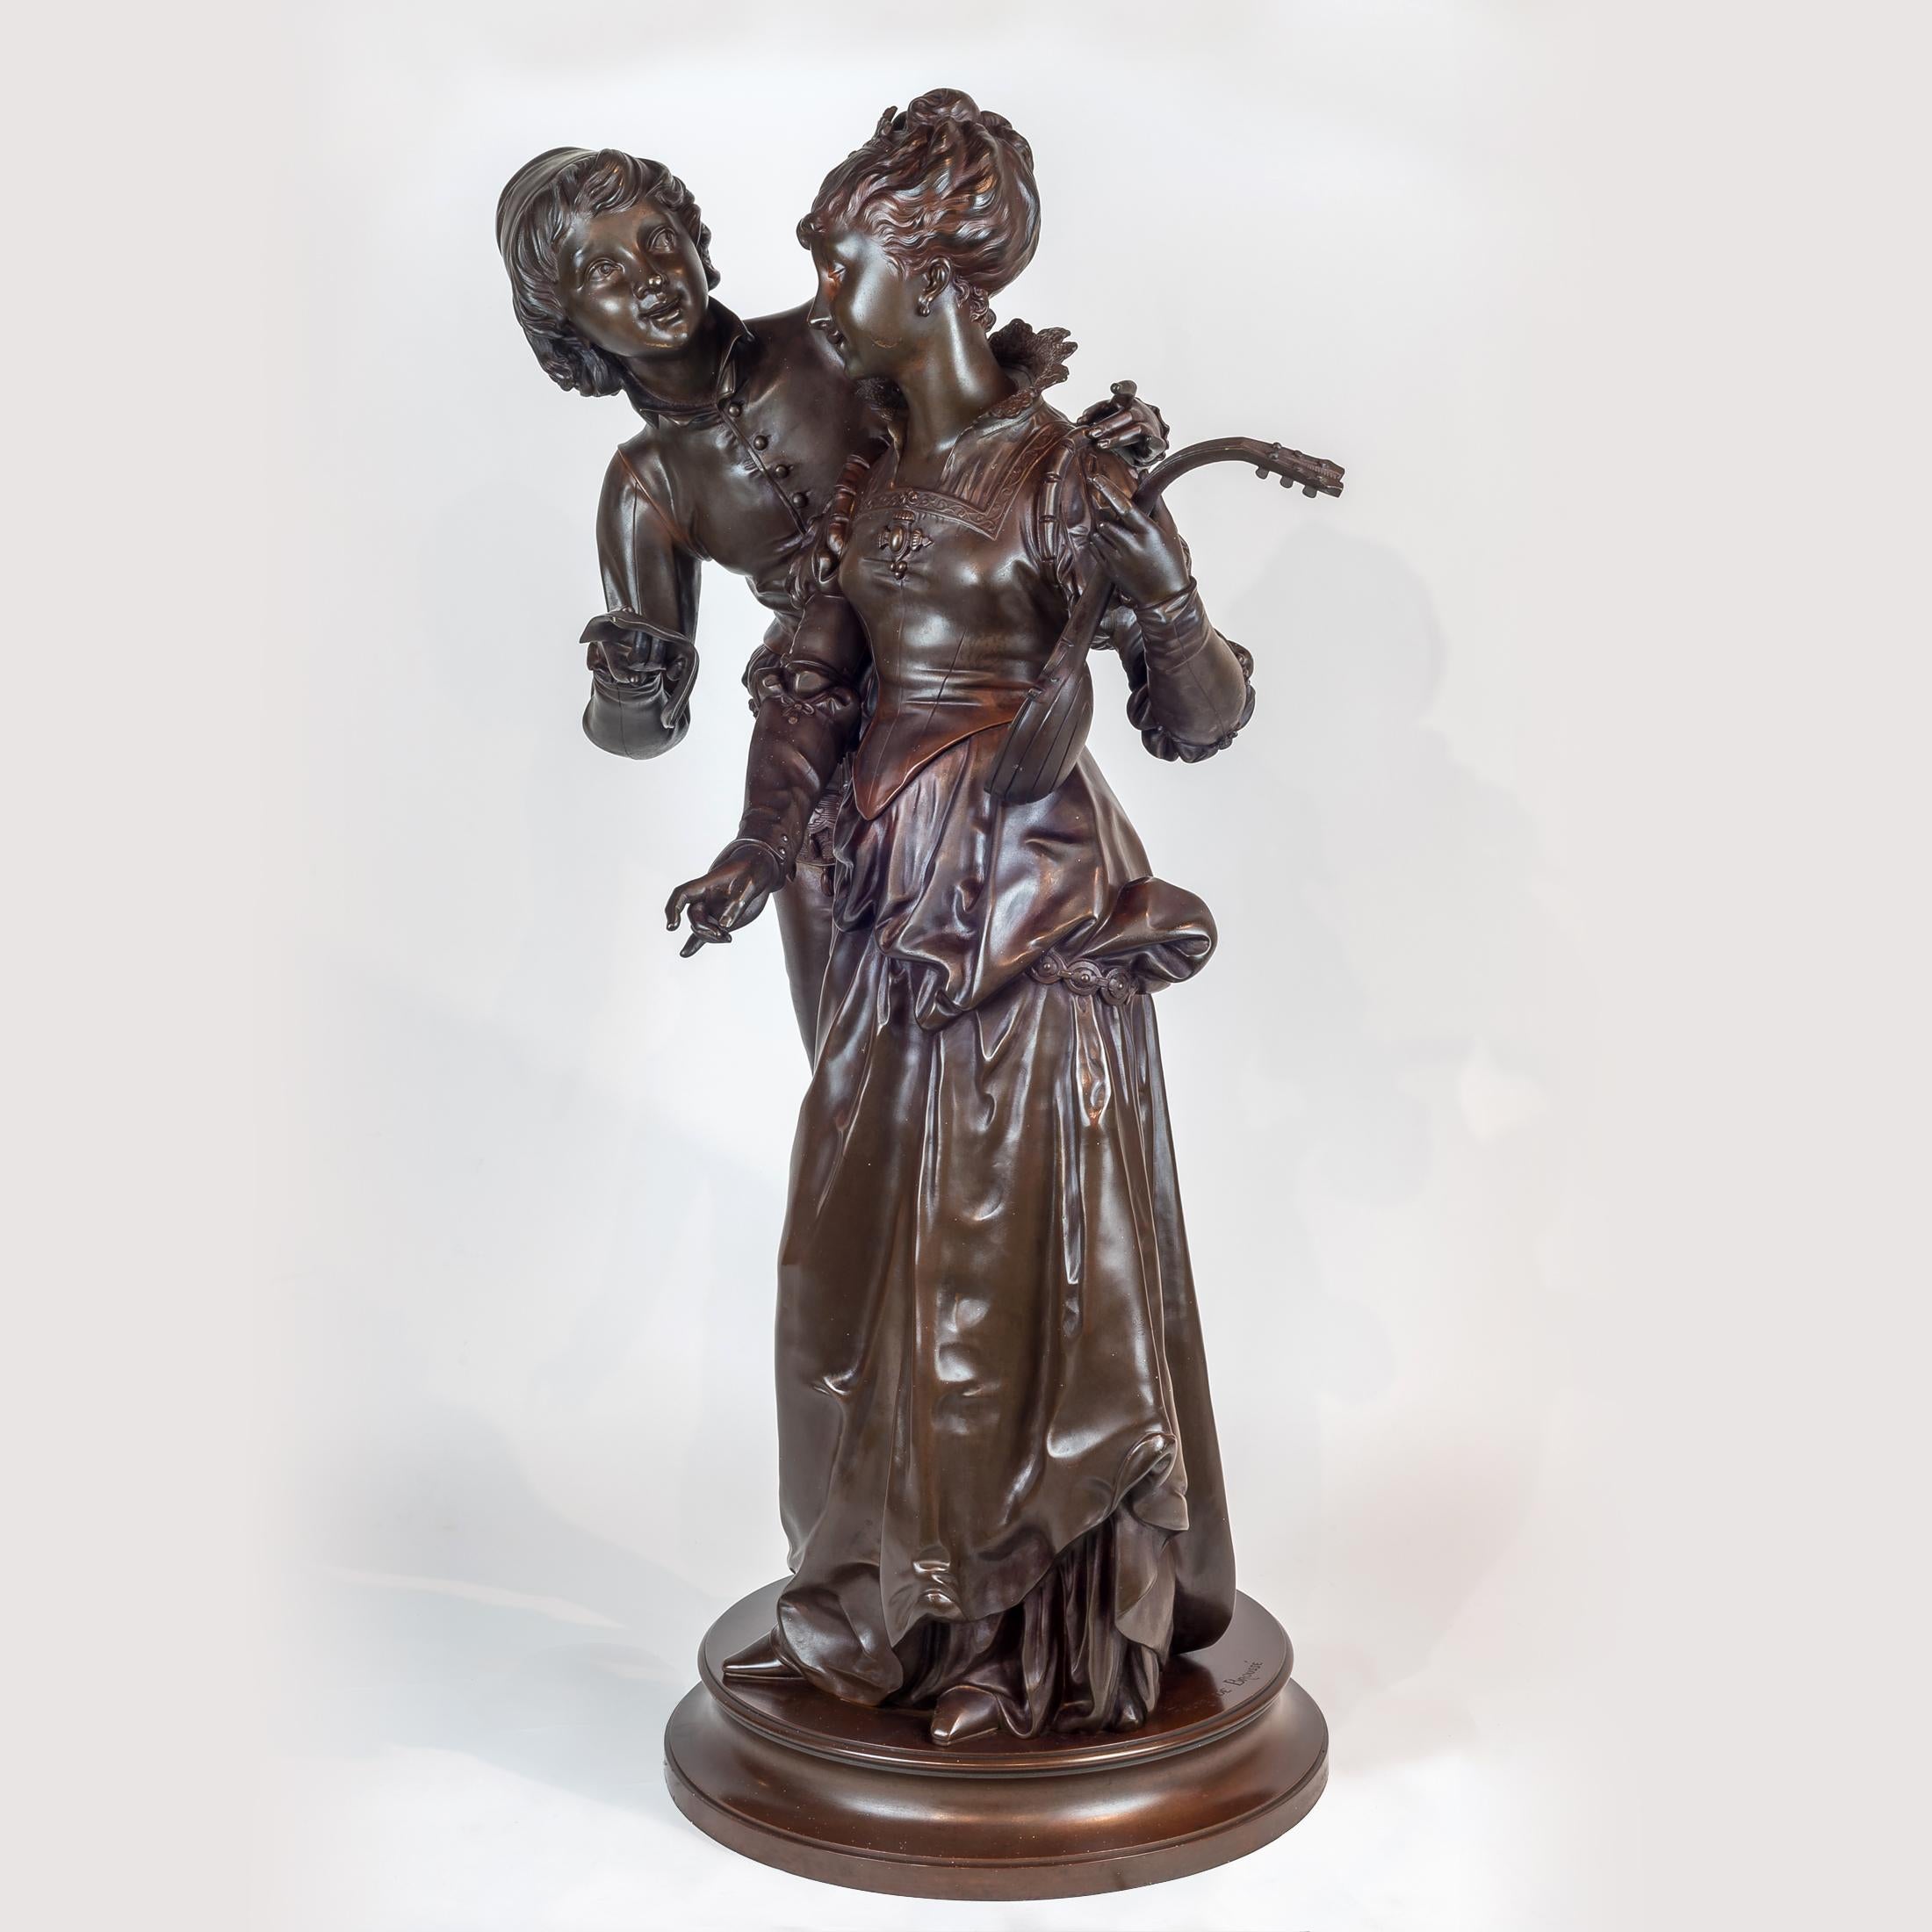 19th century patinated bronze sculpture of two lovers by Vincent Faure de Brousse
The woman holding a mandolin on her left arm. Inscribed ‘Faure de Brousse’ 

Artist: Vincent Desire Faure de Brousse (1876 - 1908) 
Origin: French
Date: 19th